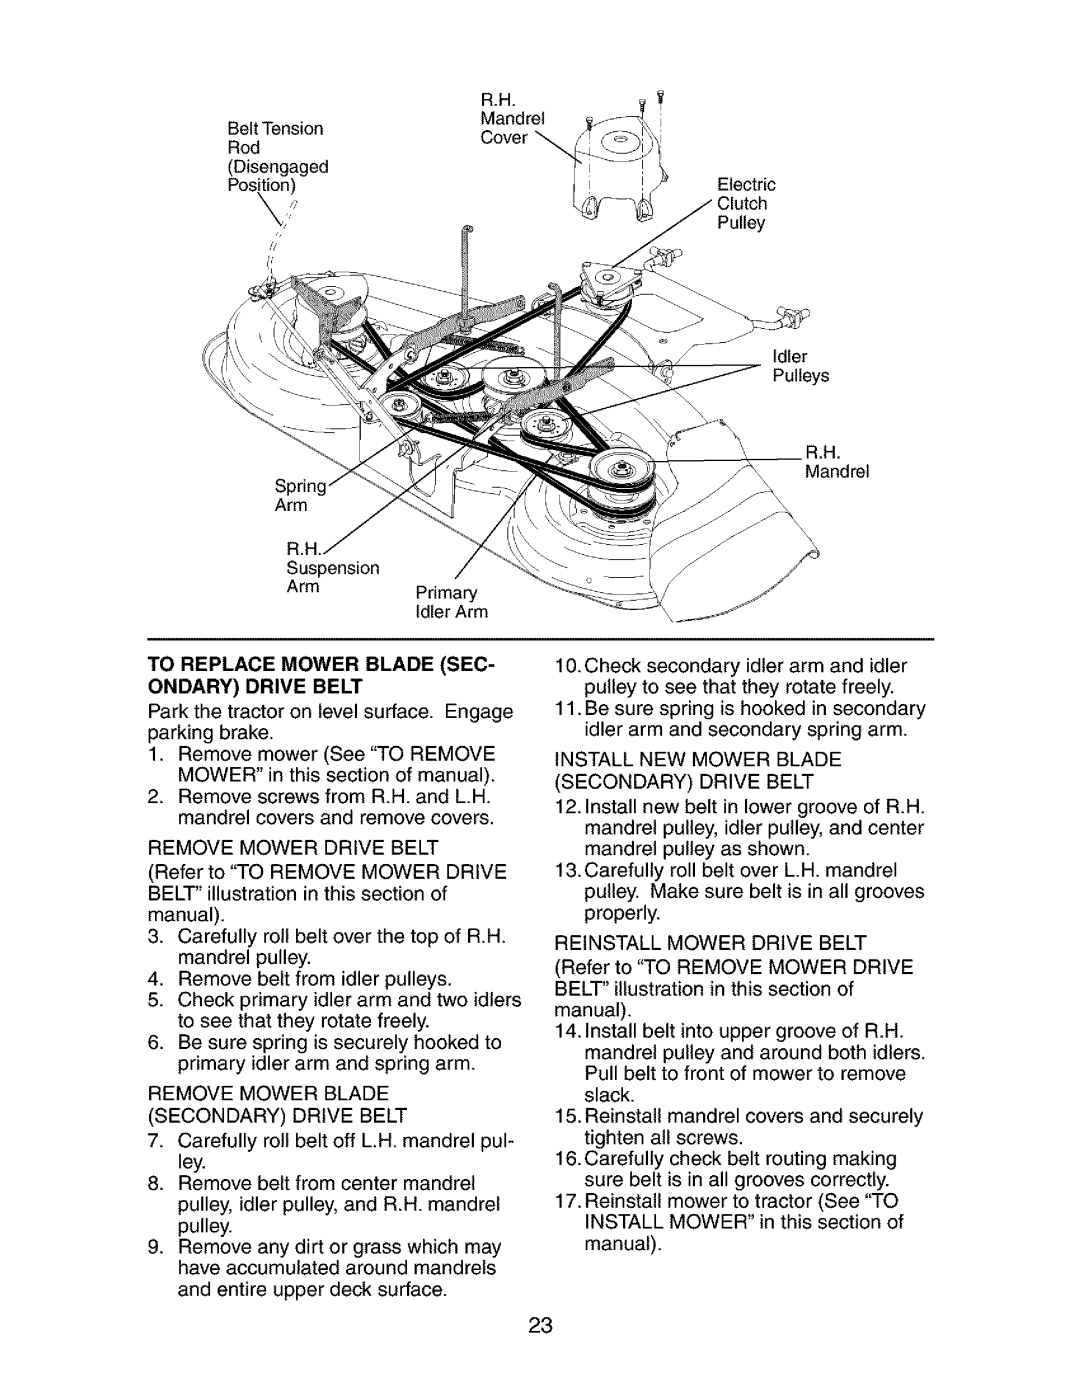 Craftsman 917.275283 owner manual To Replace Mower Blade Sec Ondary Drive Belt 